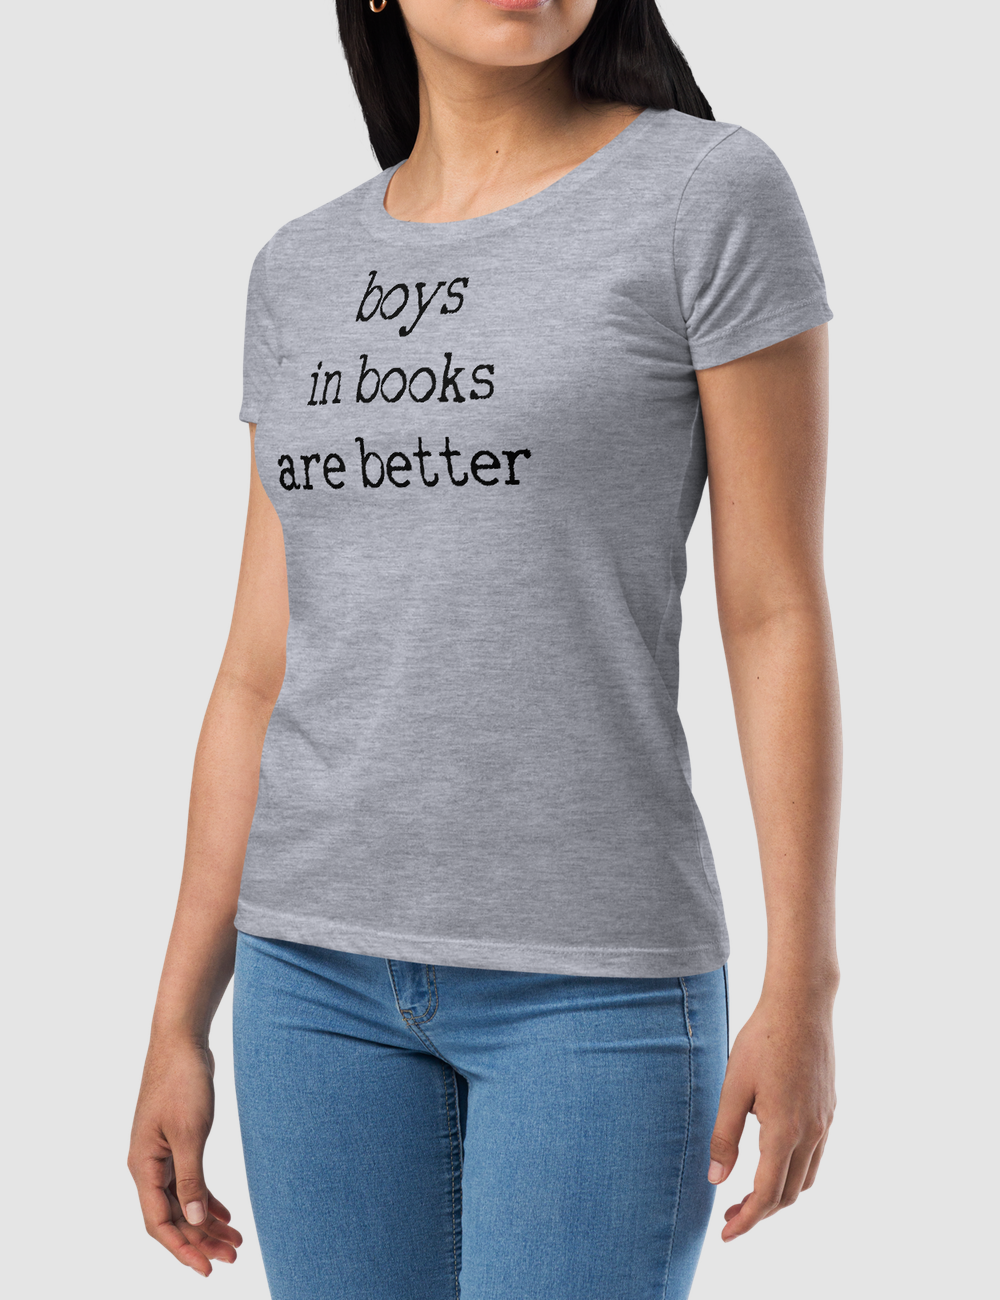 Boys In Books Are Better | Women's Fitted T-Shirt OniTakai